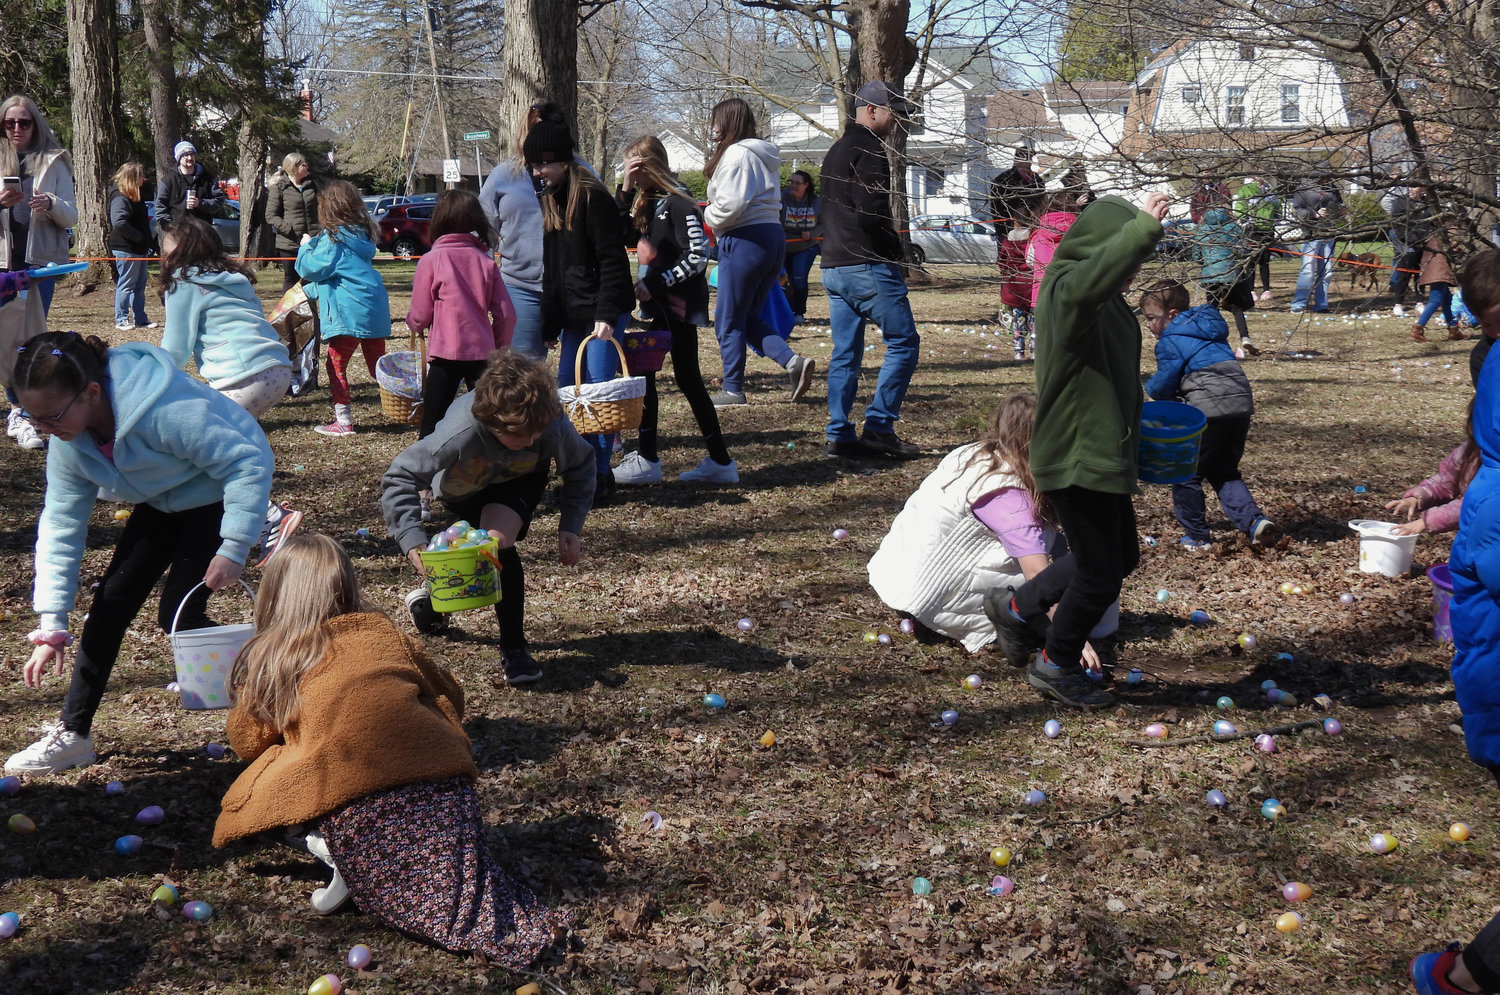 The annual Oneida Easter Egg Hunt saw kids of all ages in Allen Park filling their bags and baskets with eggs on Saturday, April 8 in Oneida. Pictured are kids running off to start their egg hunt.